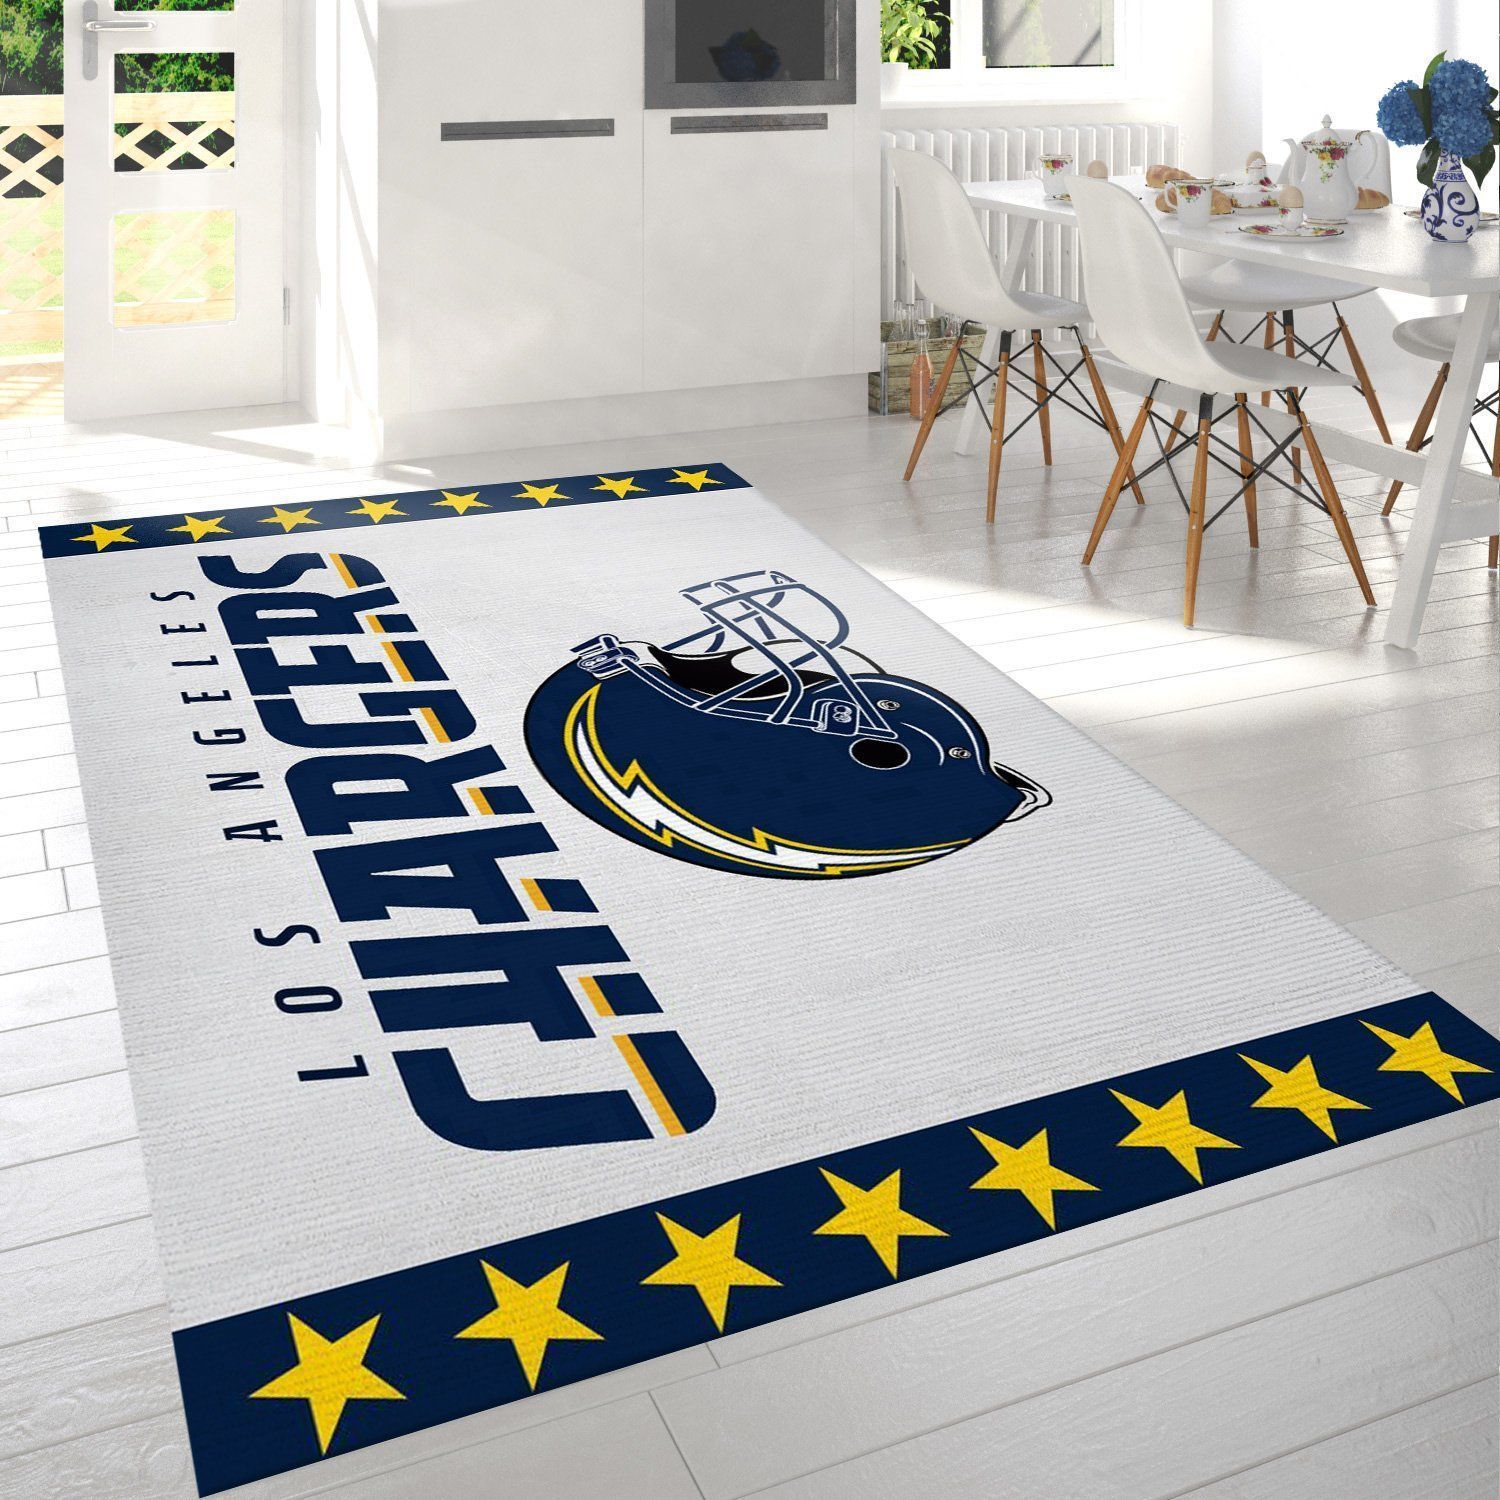 Los Angeles Chargers Nfl Logo Area Rug For Gift Living Room Rug Home Decor Floor Decor - Indoor Outdoor Rugs